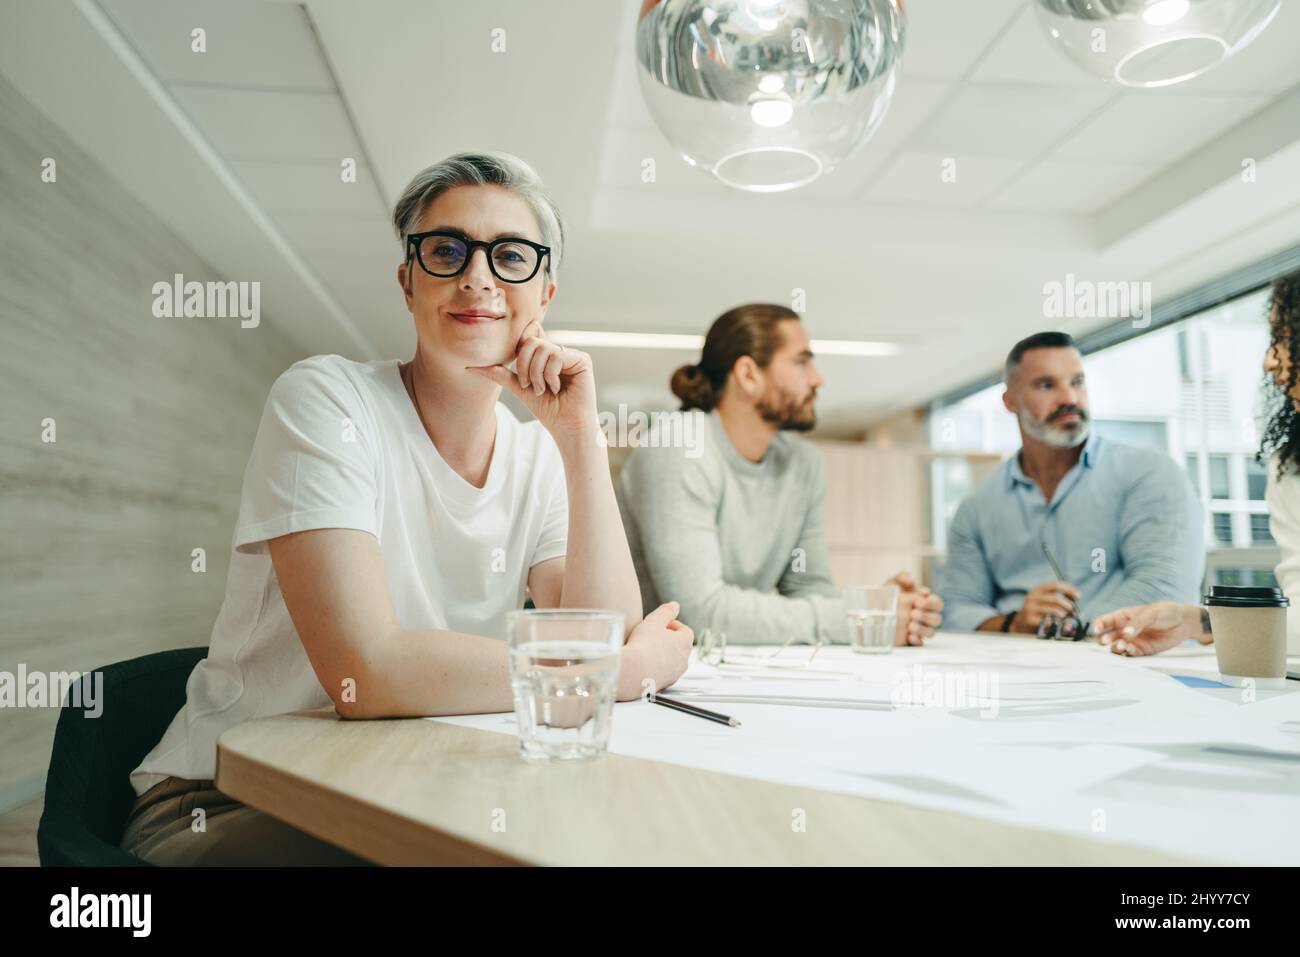 Female design professional looking at the camera while sitting in a meeting with her team. Group of creative businesspeople brainstorming while workin Stock Photo